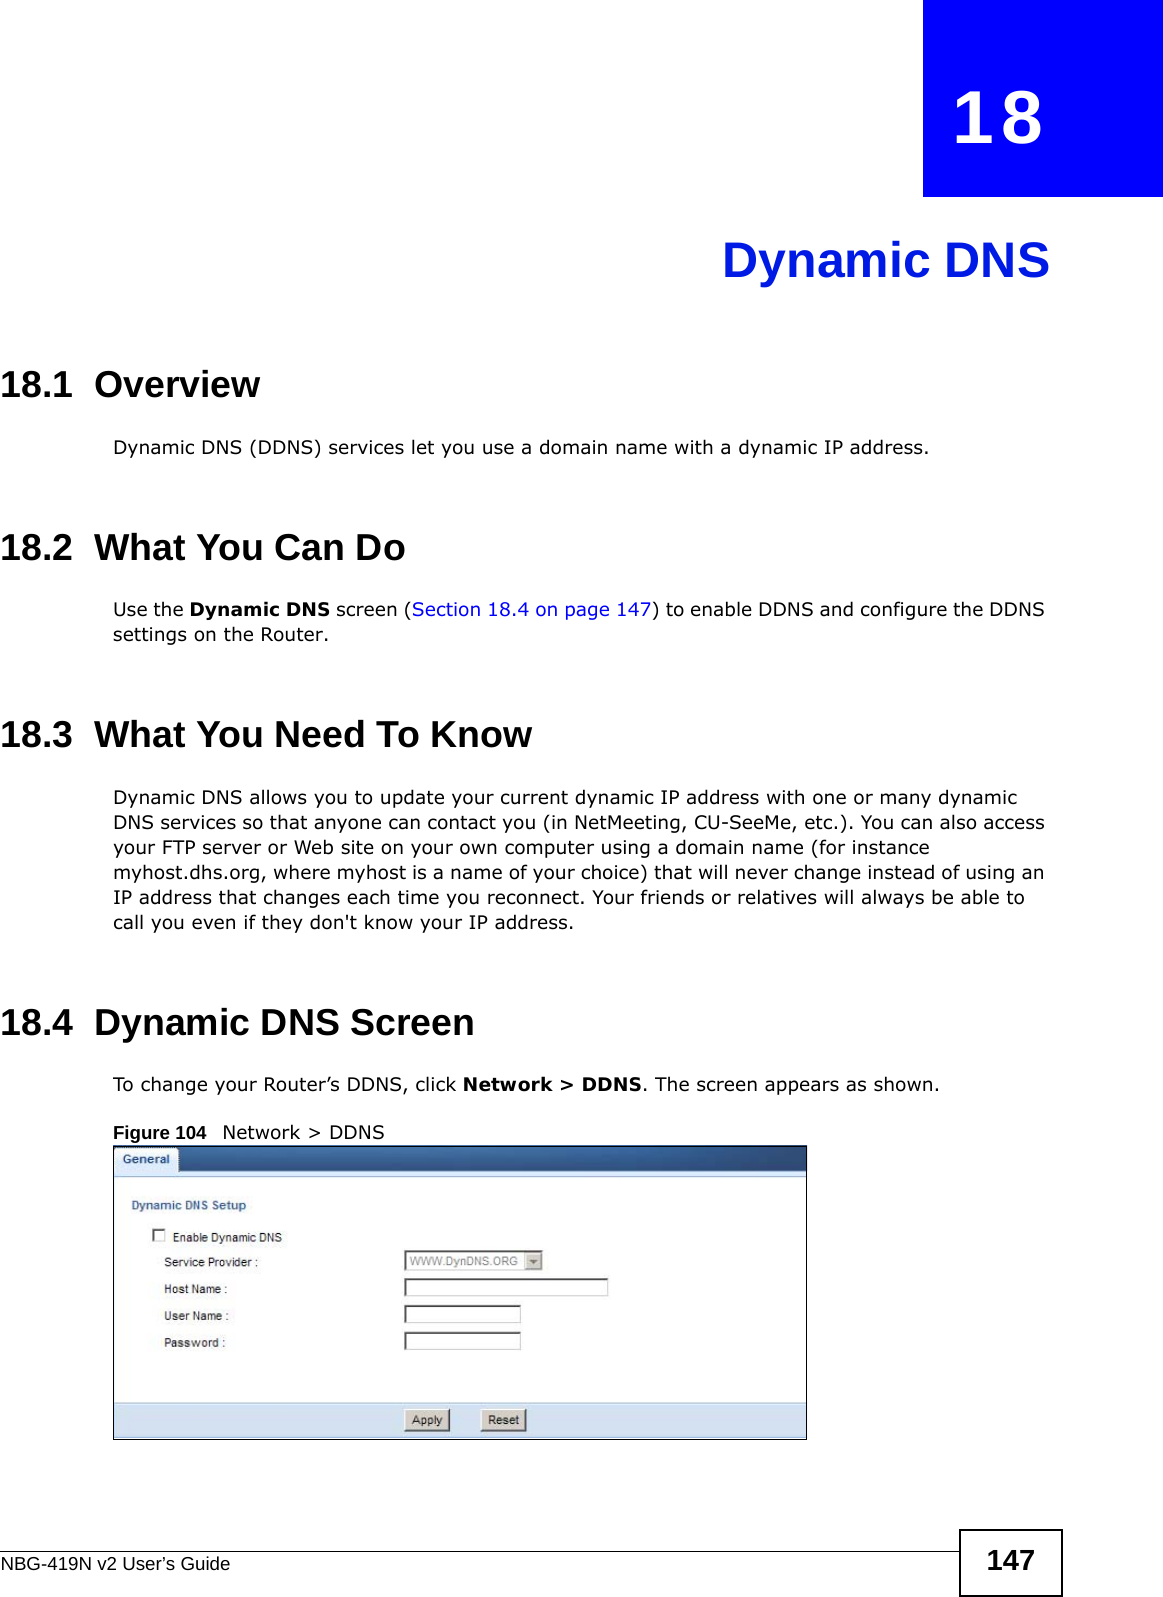 NBG-419N v2 User’s Guide 147CHAPTER   18Dynamic DNS18.1  Overview Dynamic DNS (DDNS) services let you use a domain name with a dynamic IP address.18.2  What You Can DoUse the Dynamic DNS screen (Section 18.4 on page 147) to enable DDNS and configure the DDNS settings on the Router.18.3  What You Need To KnowDynamic DNS allows you to update your current dynamic IP address with one or many dynamic DNS services so that anyone can contact you (in NetMeeting, CU-SeeMe, etc.). You can also access your FTP server or Web site on your own computer using a domain name (for instance myhost.dhs.org, where myhost is a name of your choice) that will never change instead of using an IP address that changes each time you reconnect. Your friends or relatives will always be able to call you even if they don&apos;t know your IP address.18.4  Dynamic DNS Screen   To change your Router’s DDNS, click Network &gt; DDNS. The screen appears as shown.Figure 104   Network &gt; DDNS